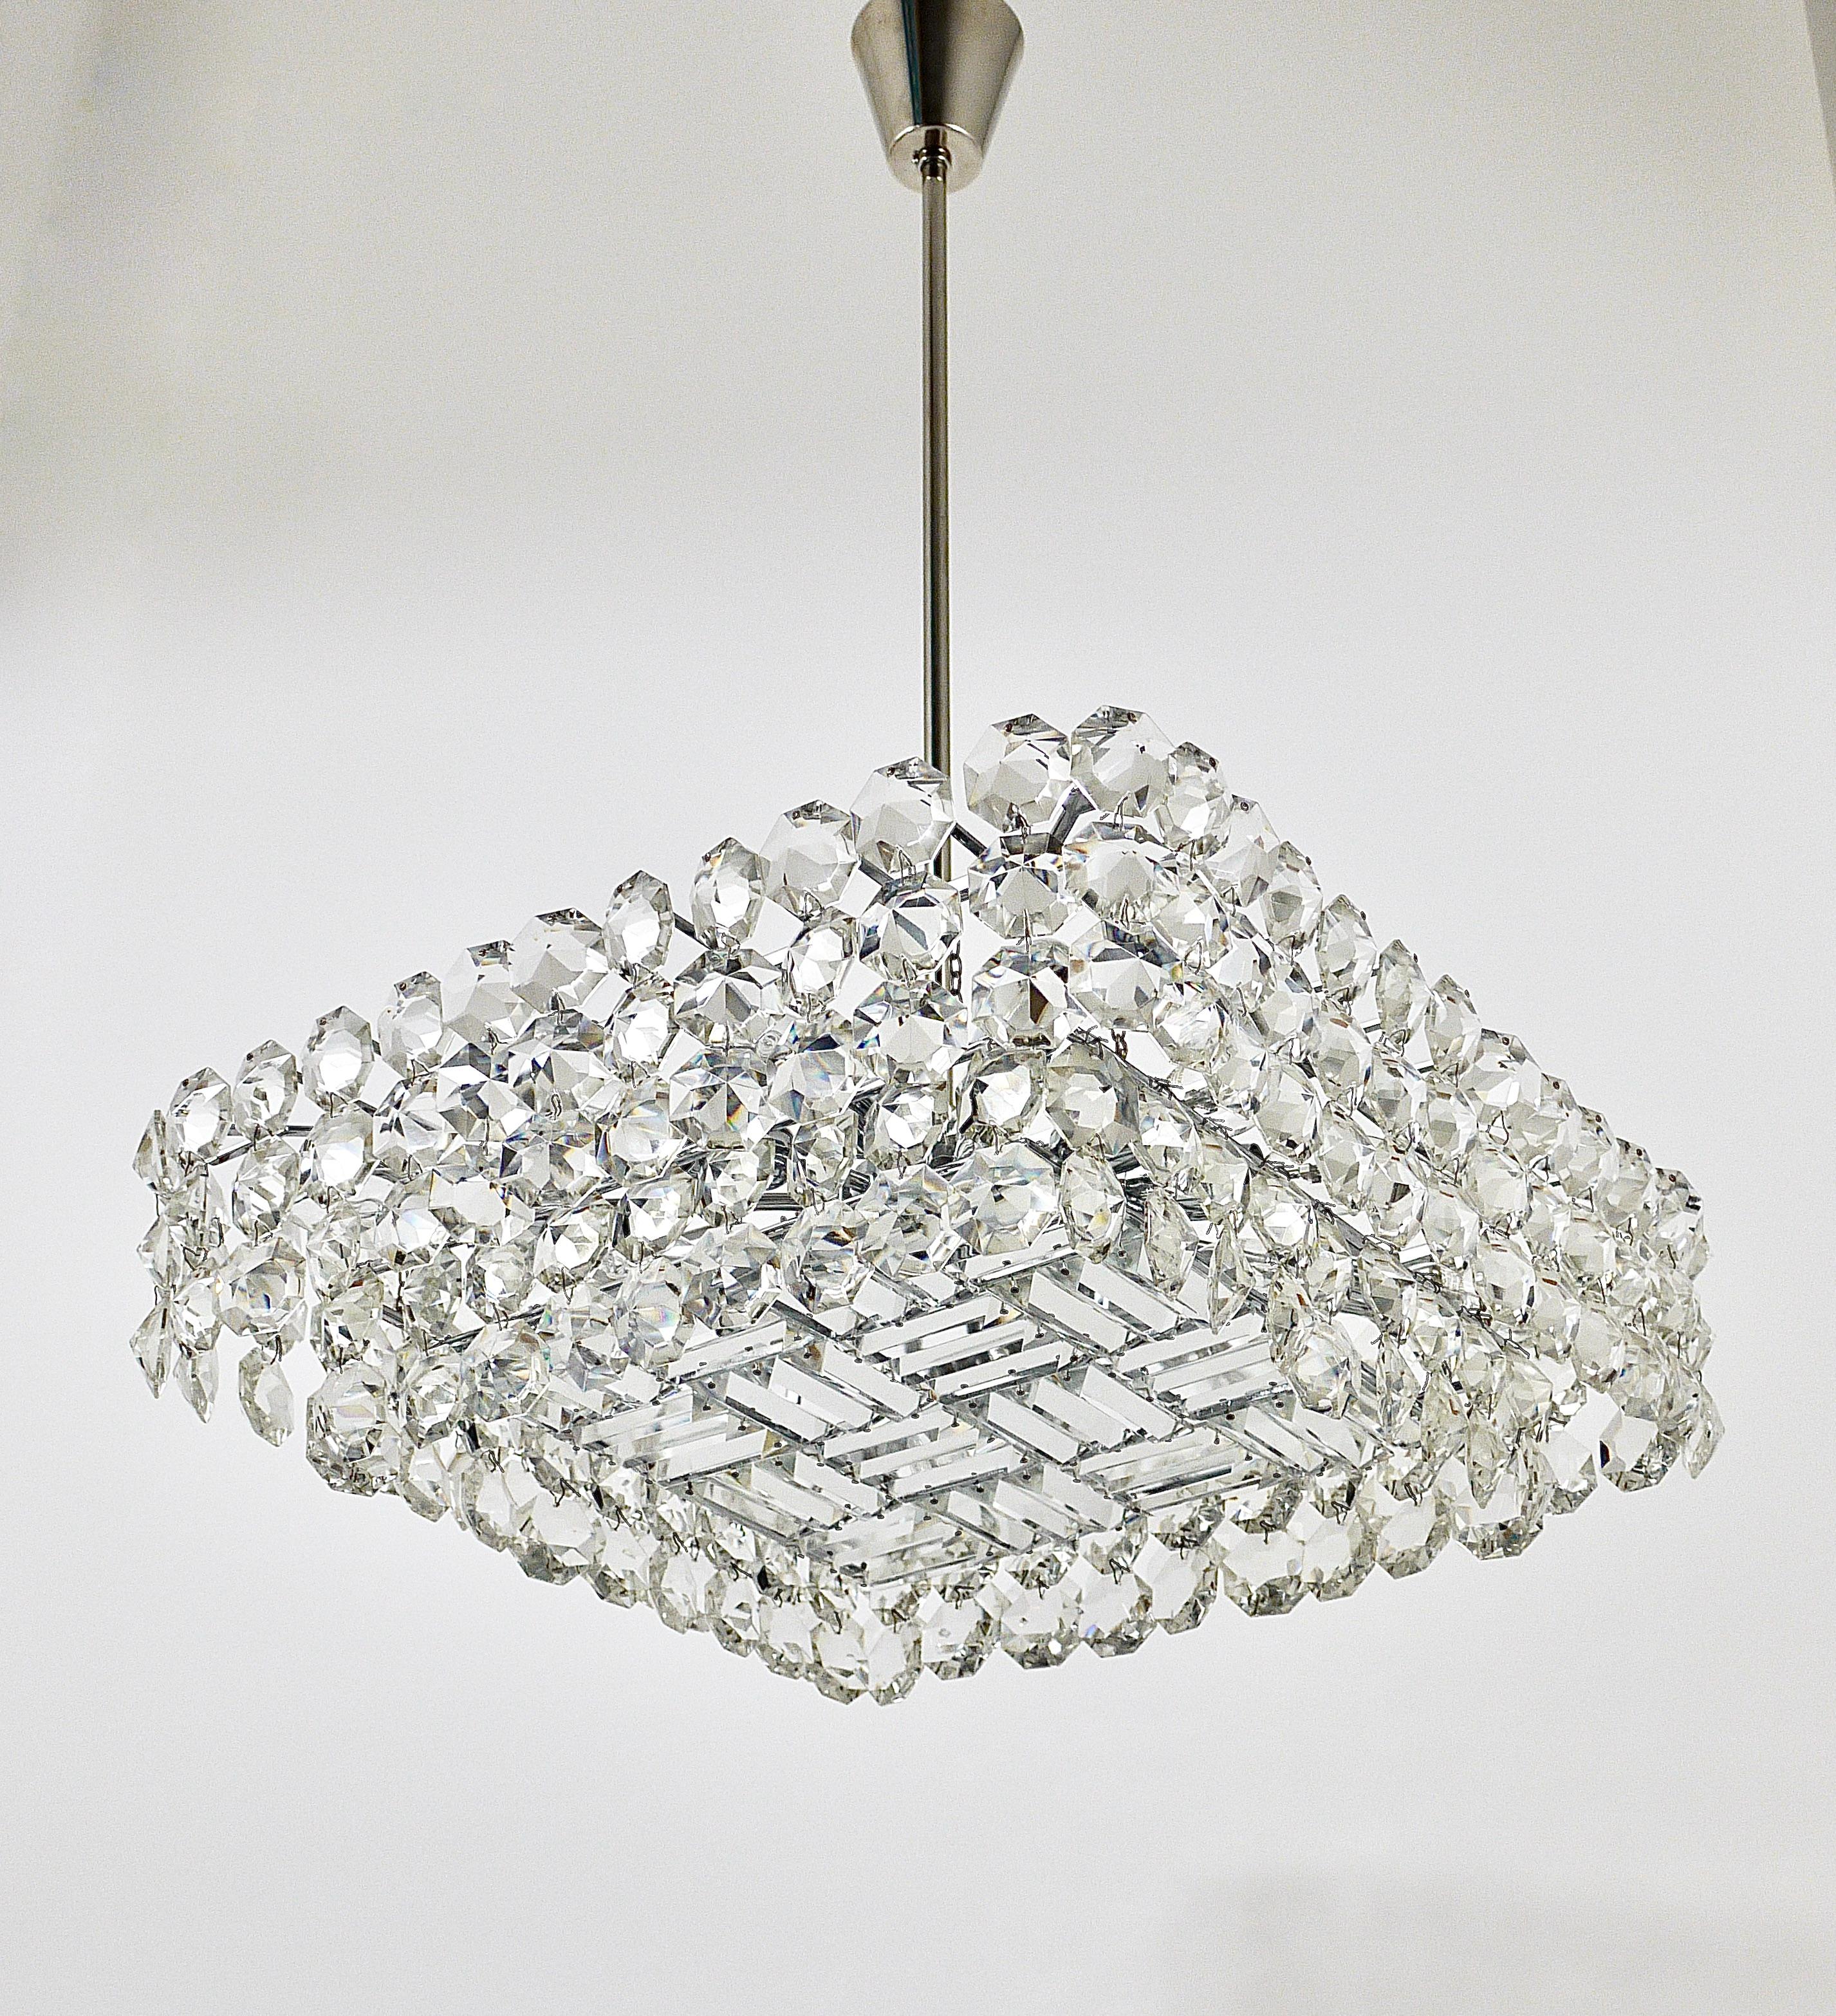 Large Square Bakalowits Chandelier with Diamond-Shaped Crystals, Austria, 1950s For Sale 8